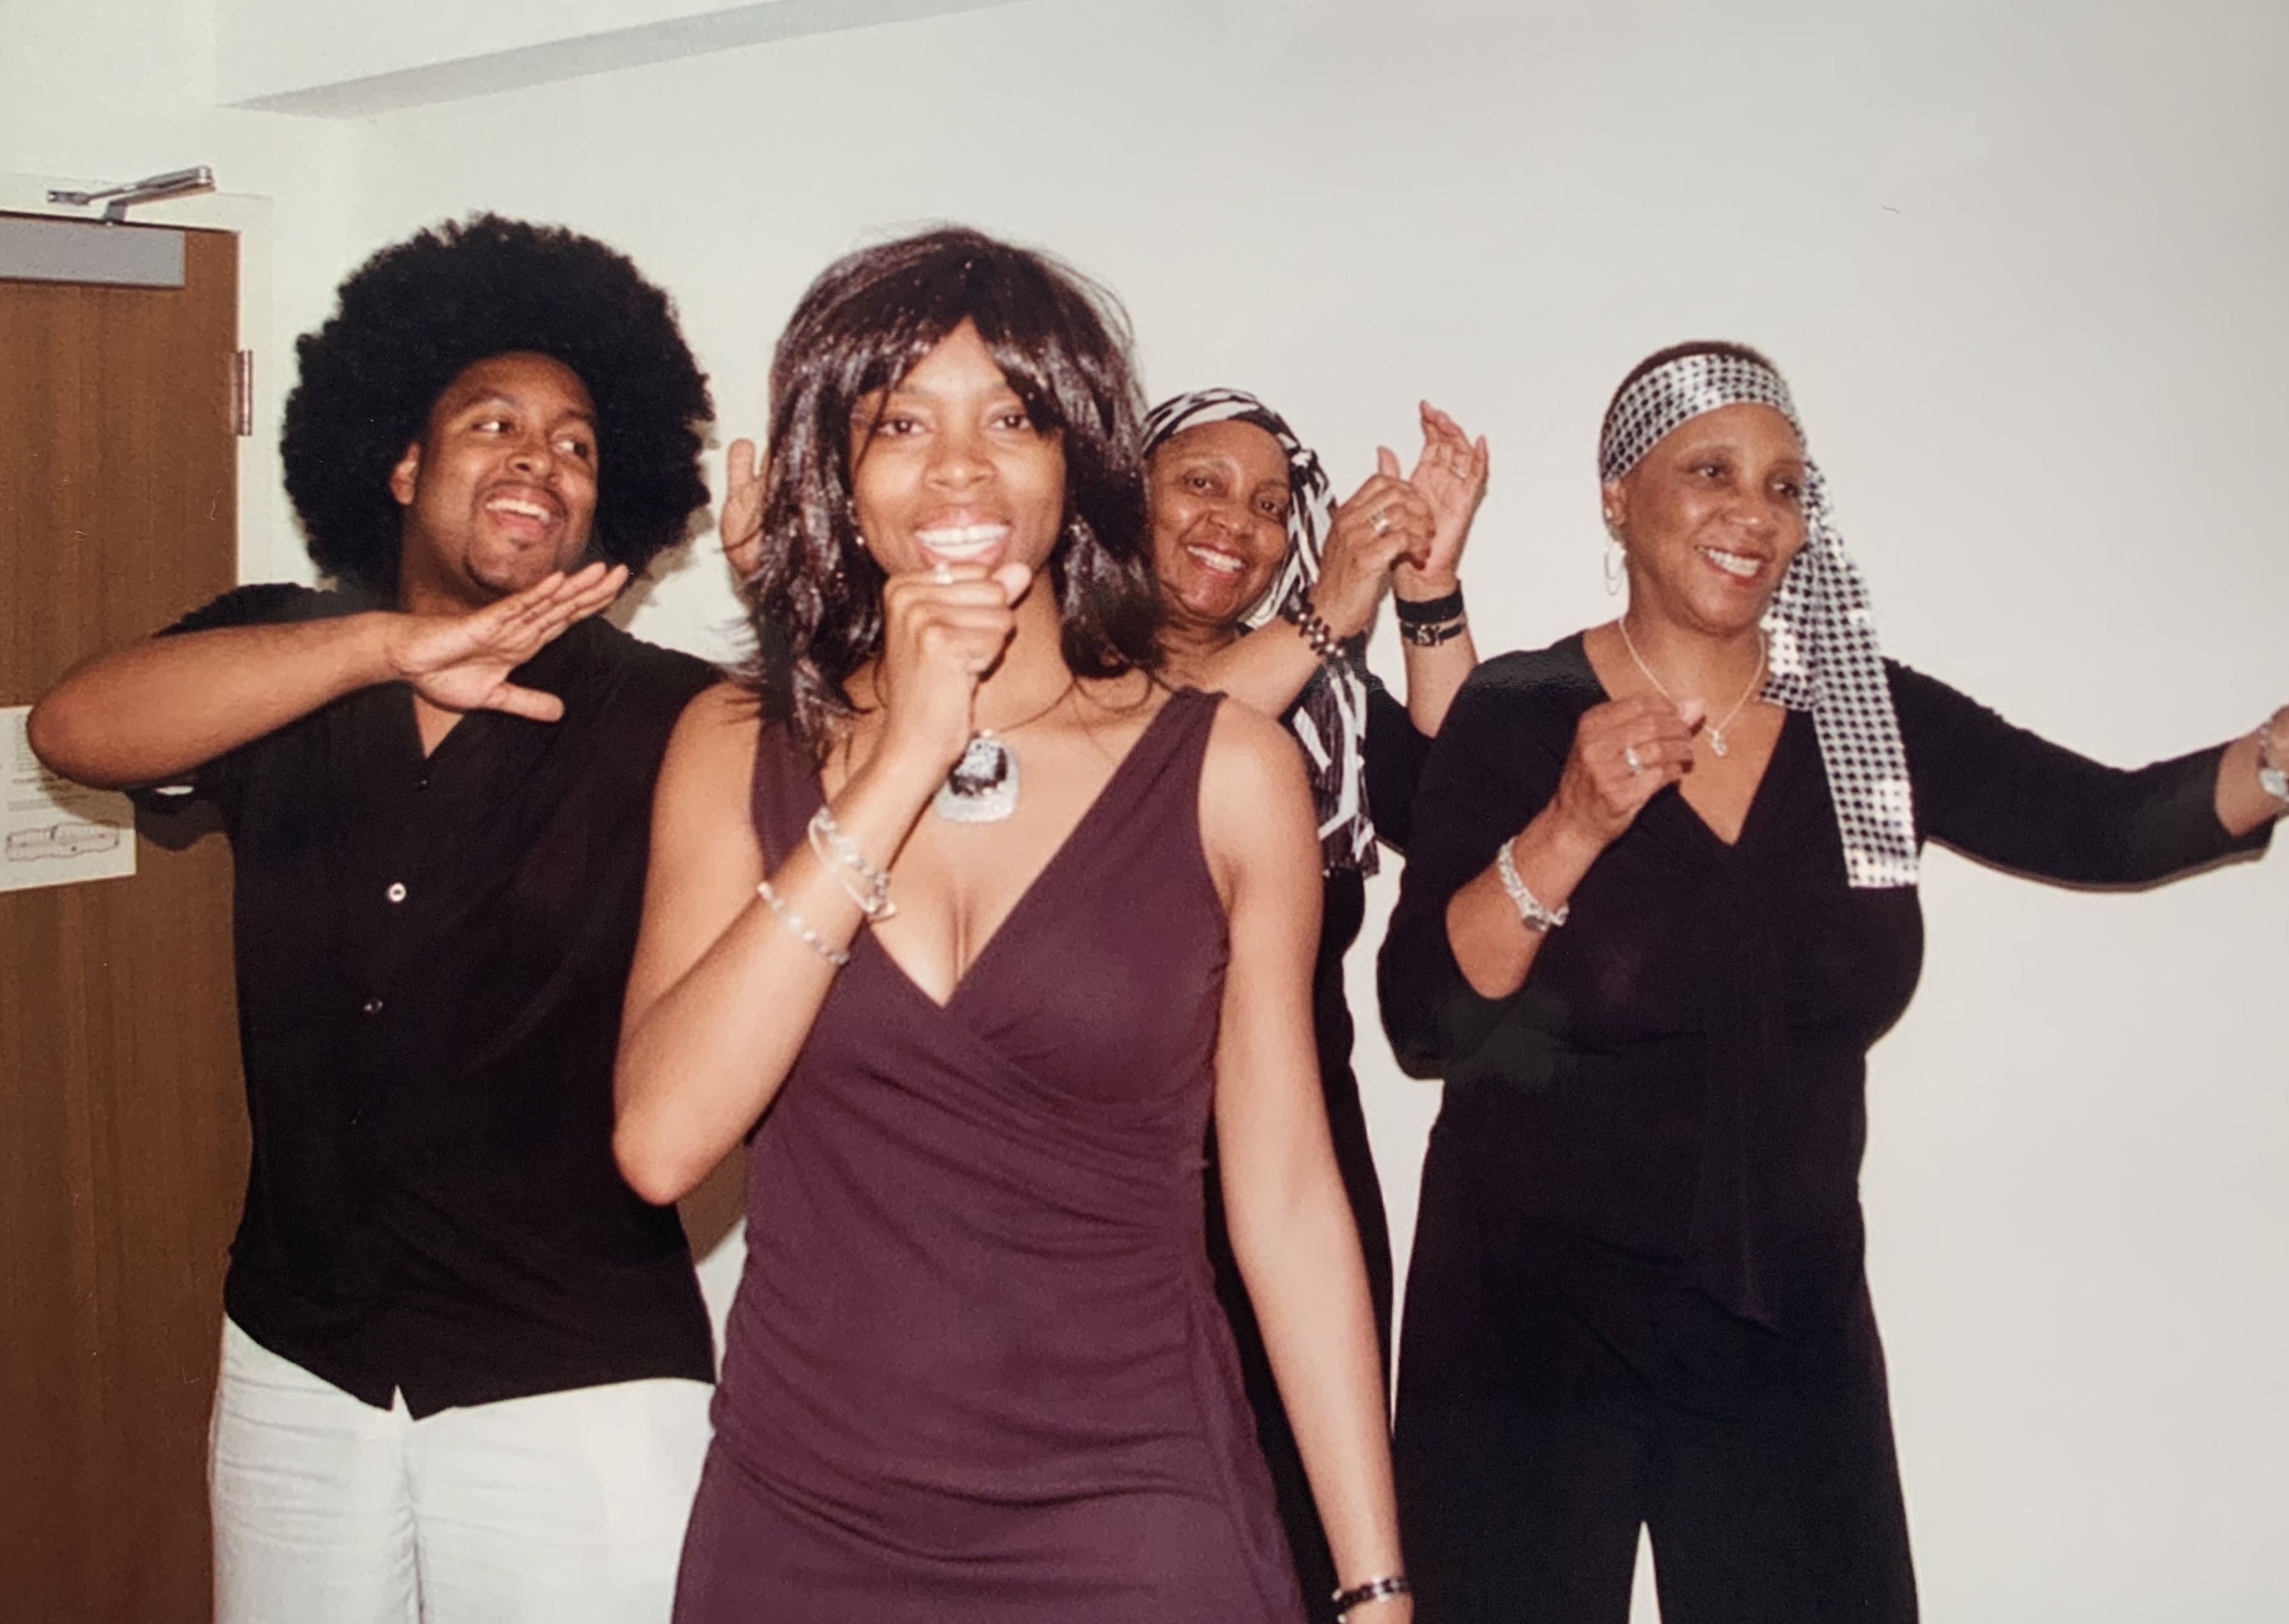 Four family members practicing a performance as Tina Turner, Ike and the Ikettes